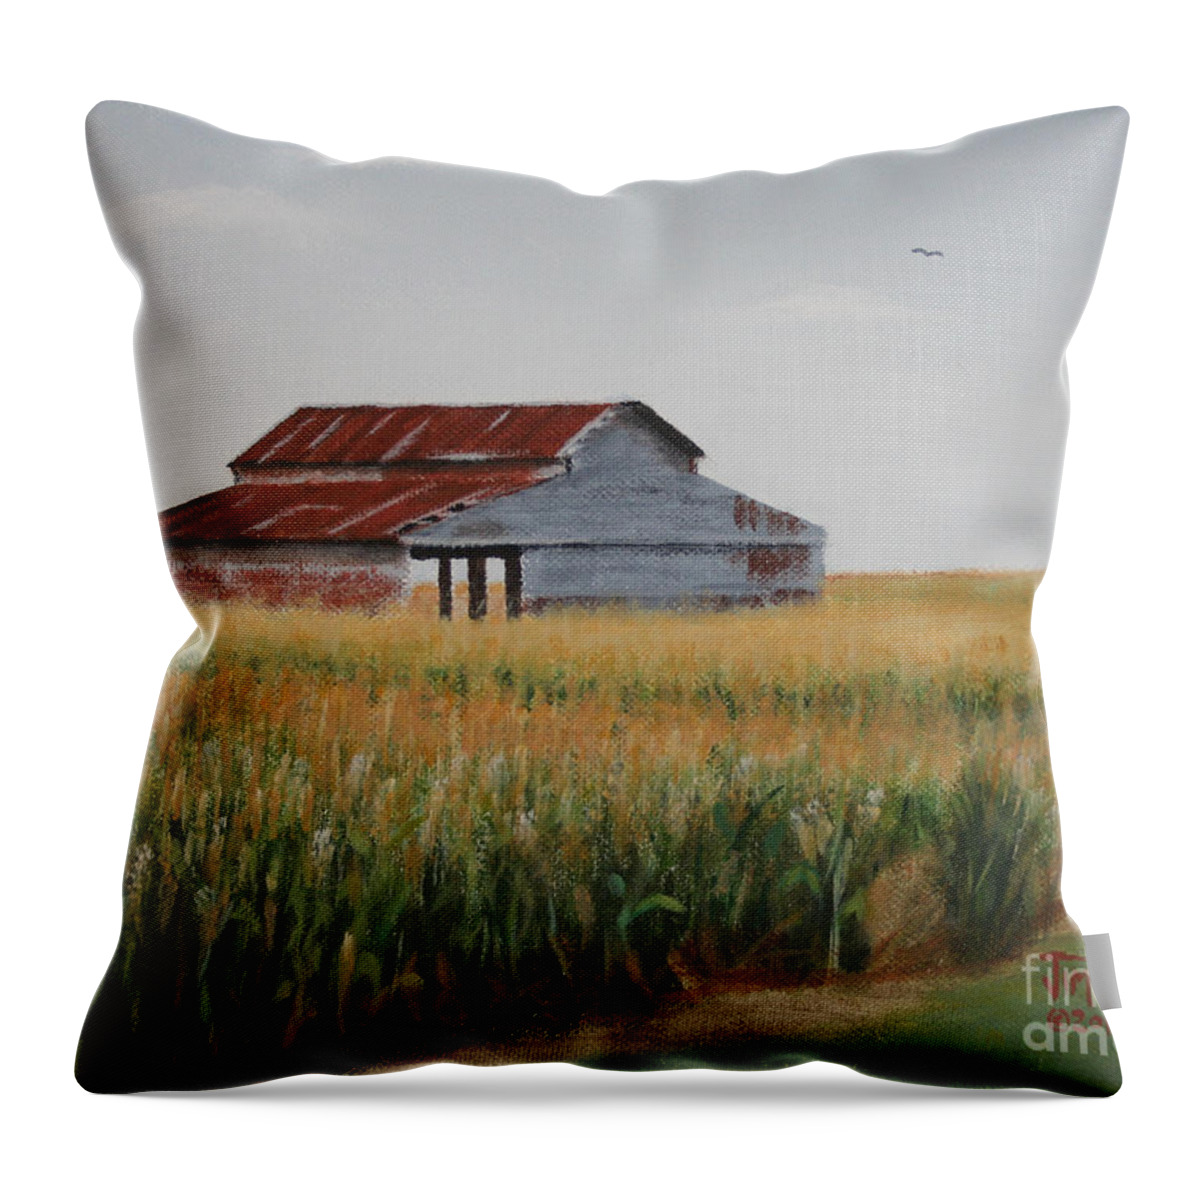 Cornfield Throw Pillow featuring the painting Cornfield Barn by Jimmie Bartlett